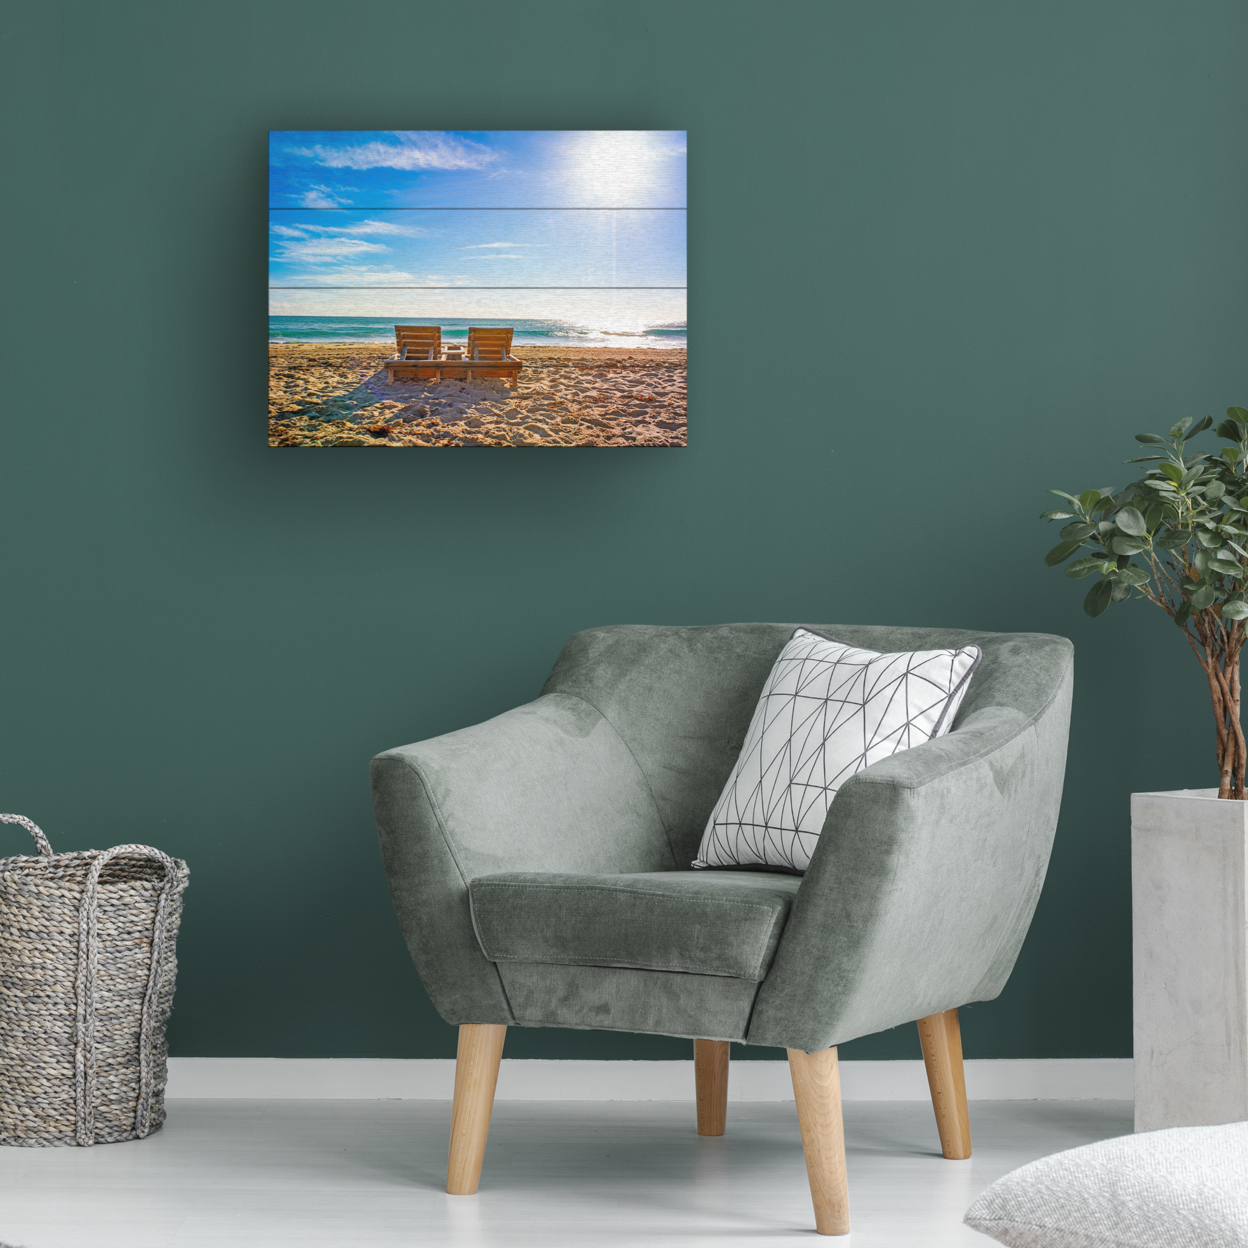 Wall Art 12 X 16 Inches Titled Florida Beach Chair Ready To Hang Printed On Wooden Planks